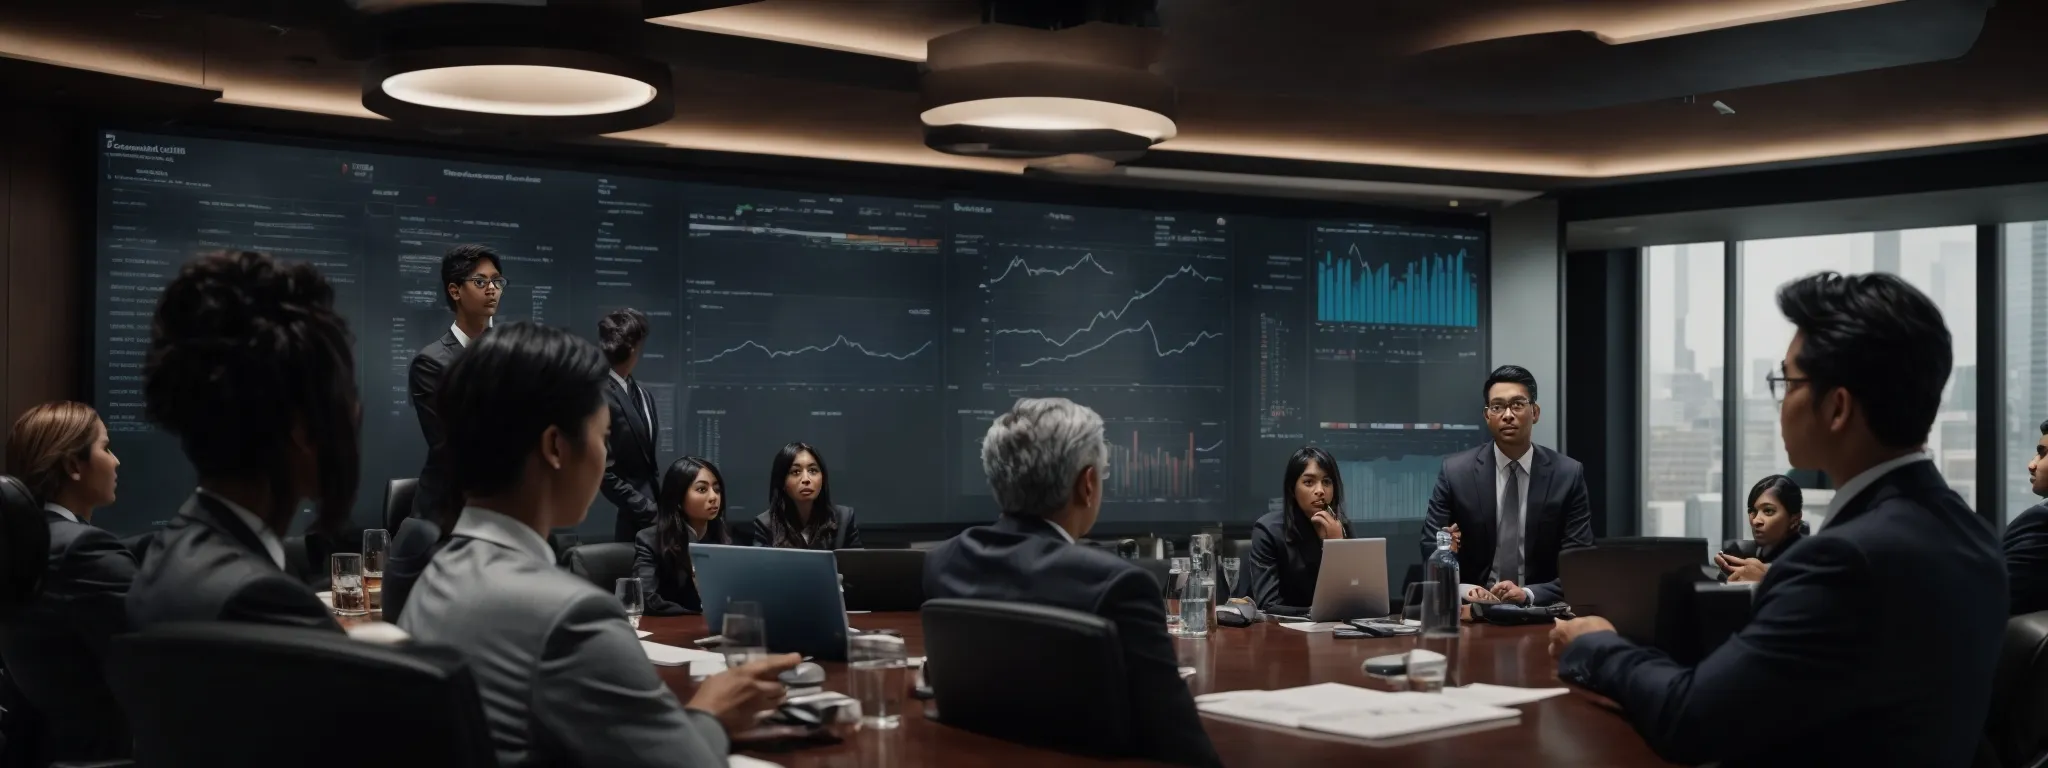 a corporate boardroom filled with diverse professionals discussing strategies over a large digital screen displaying analytics and graphs.